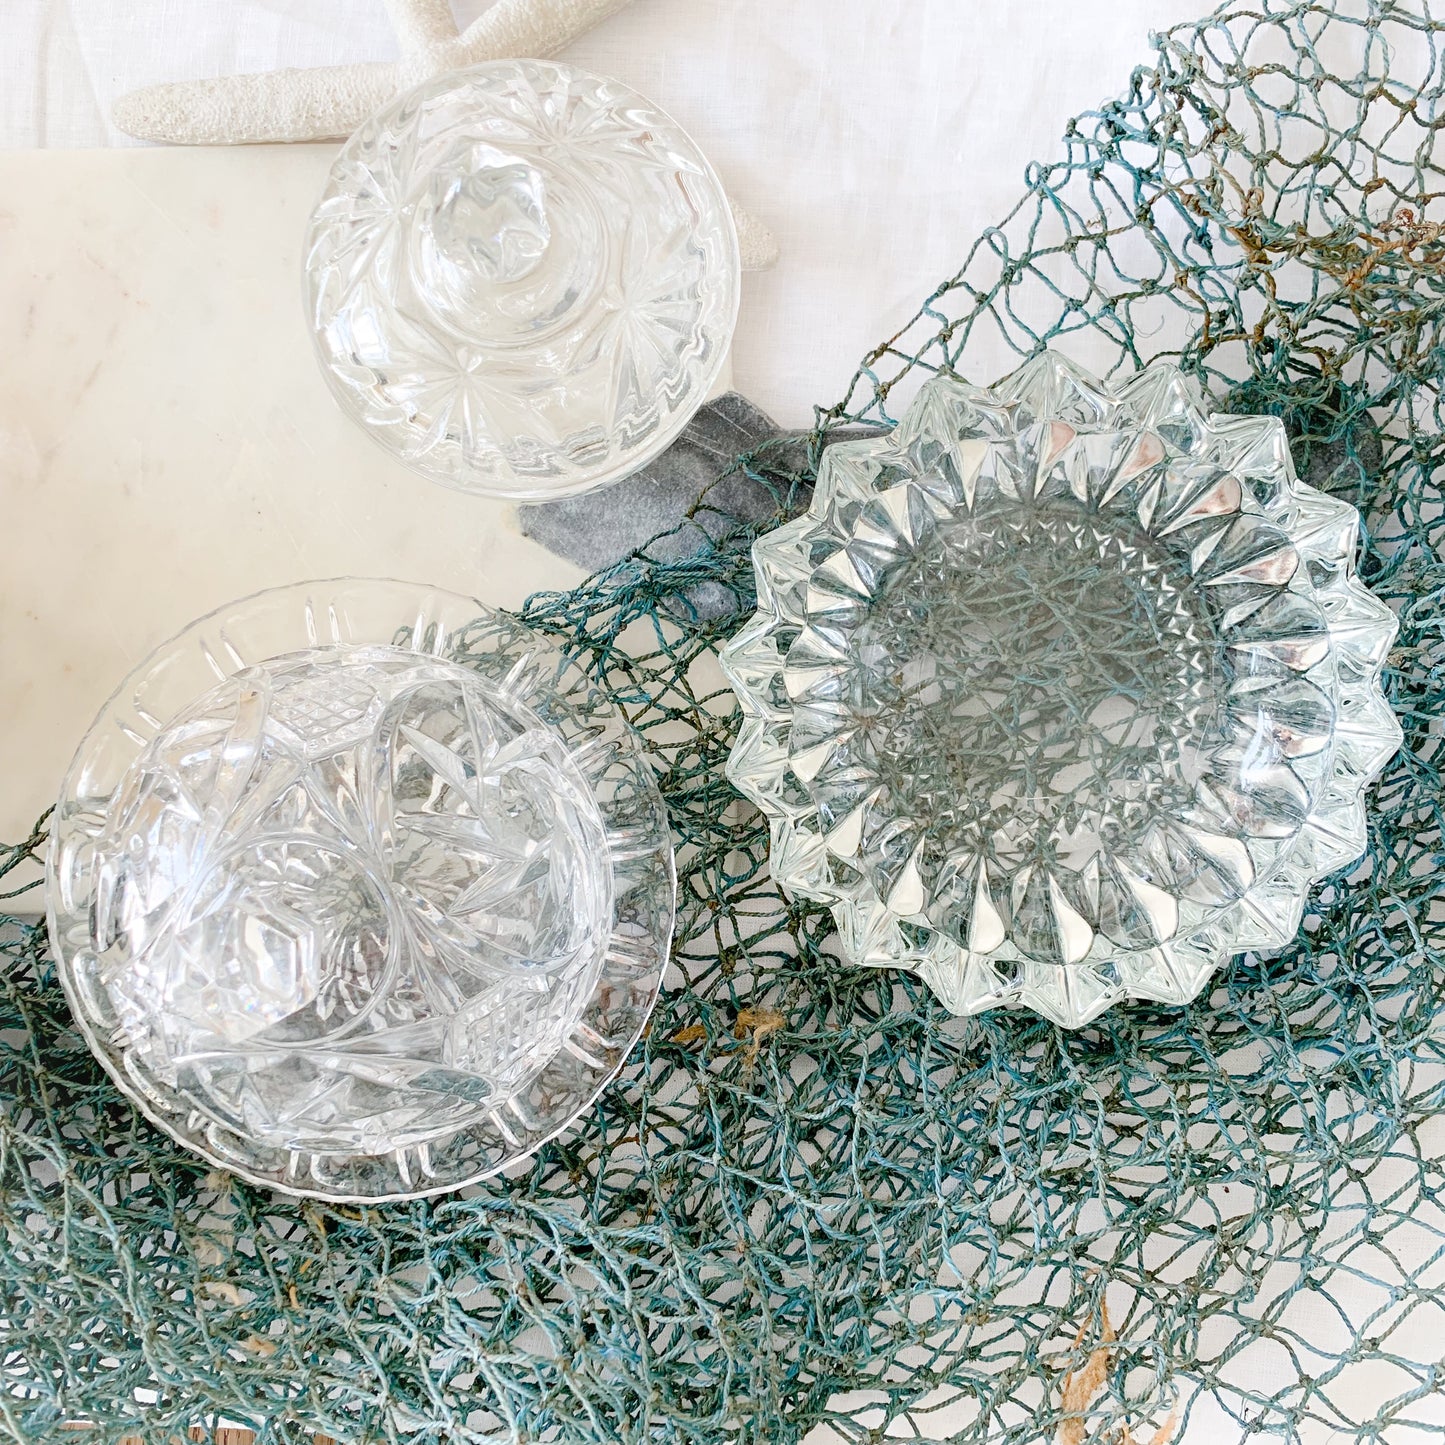 Palm Crystal Dish - BelleStyle